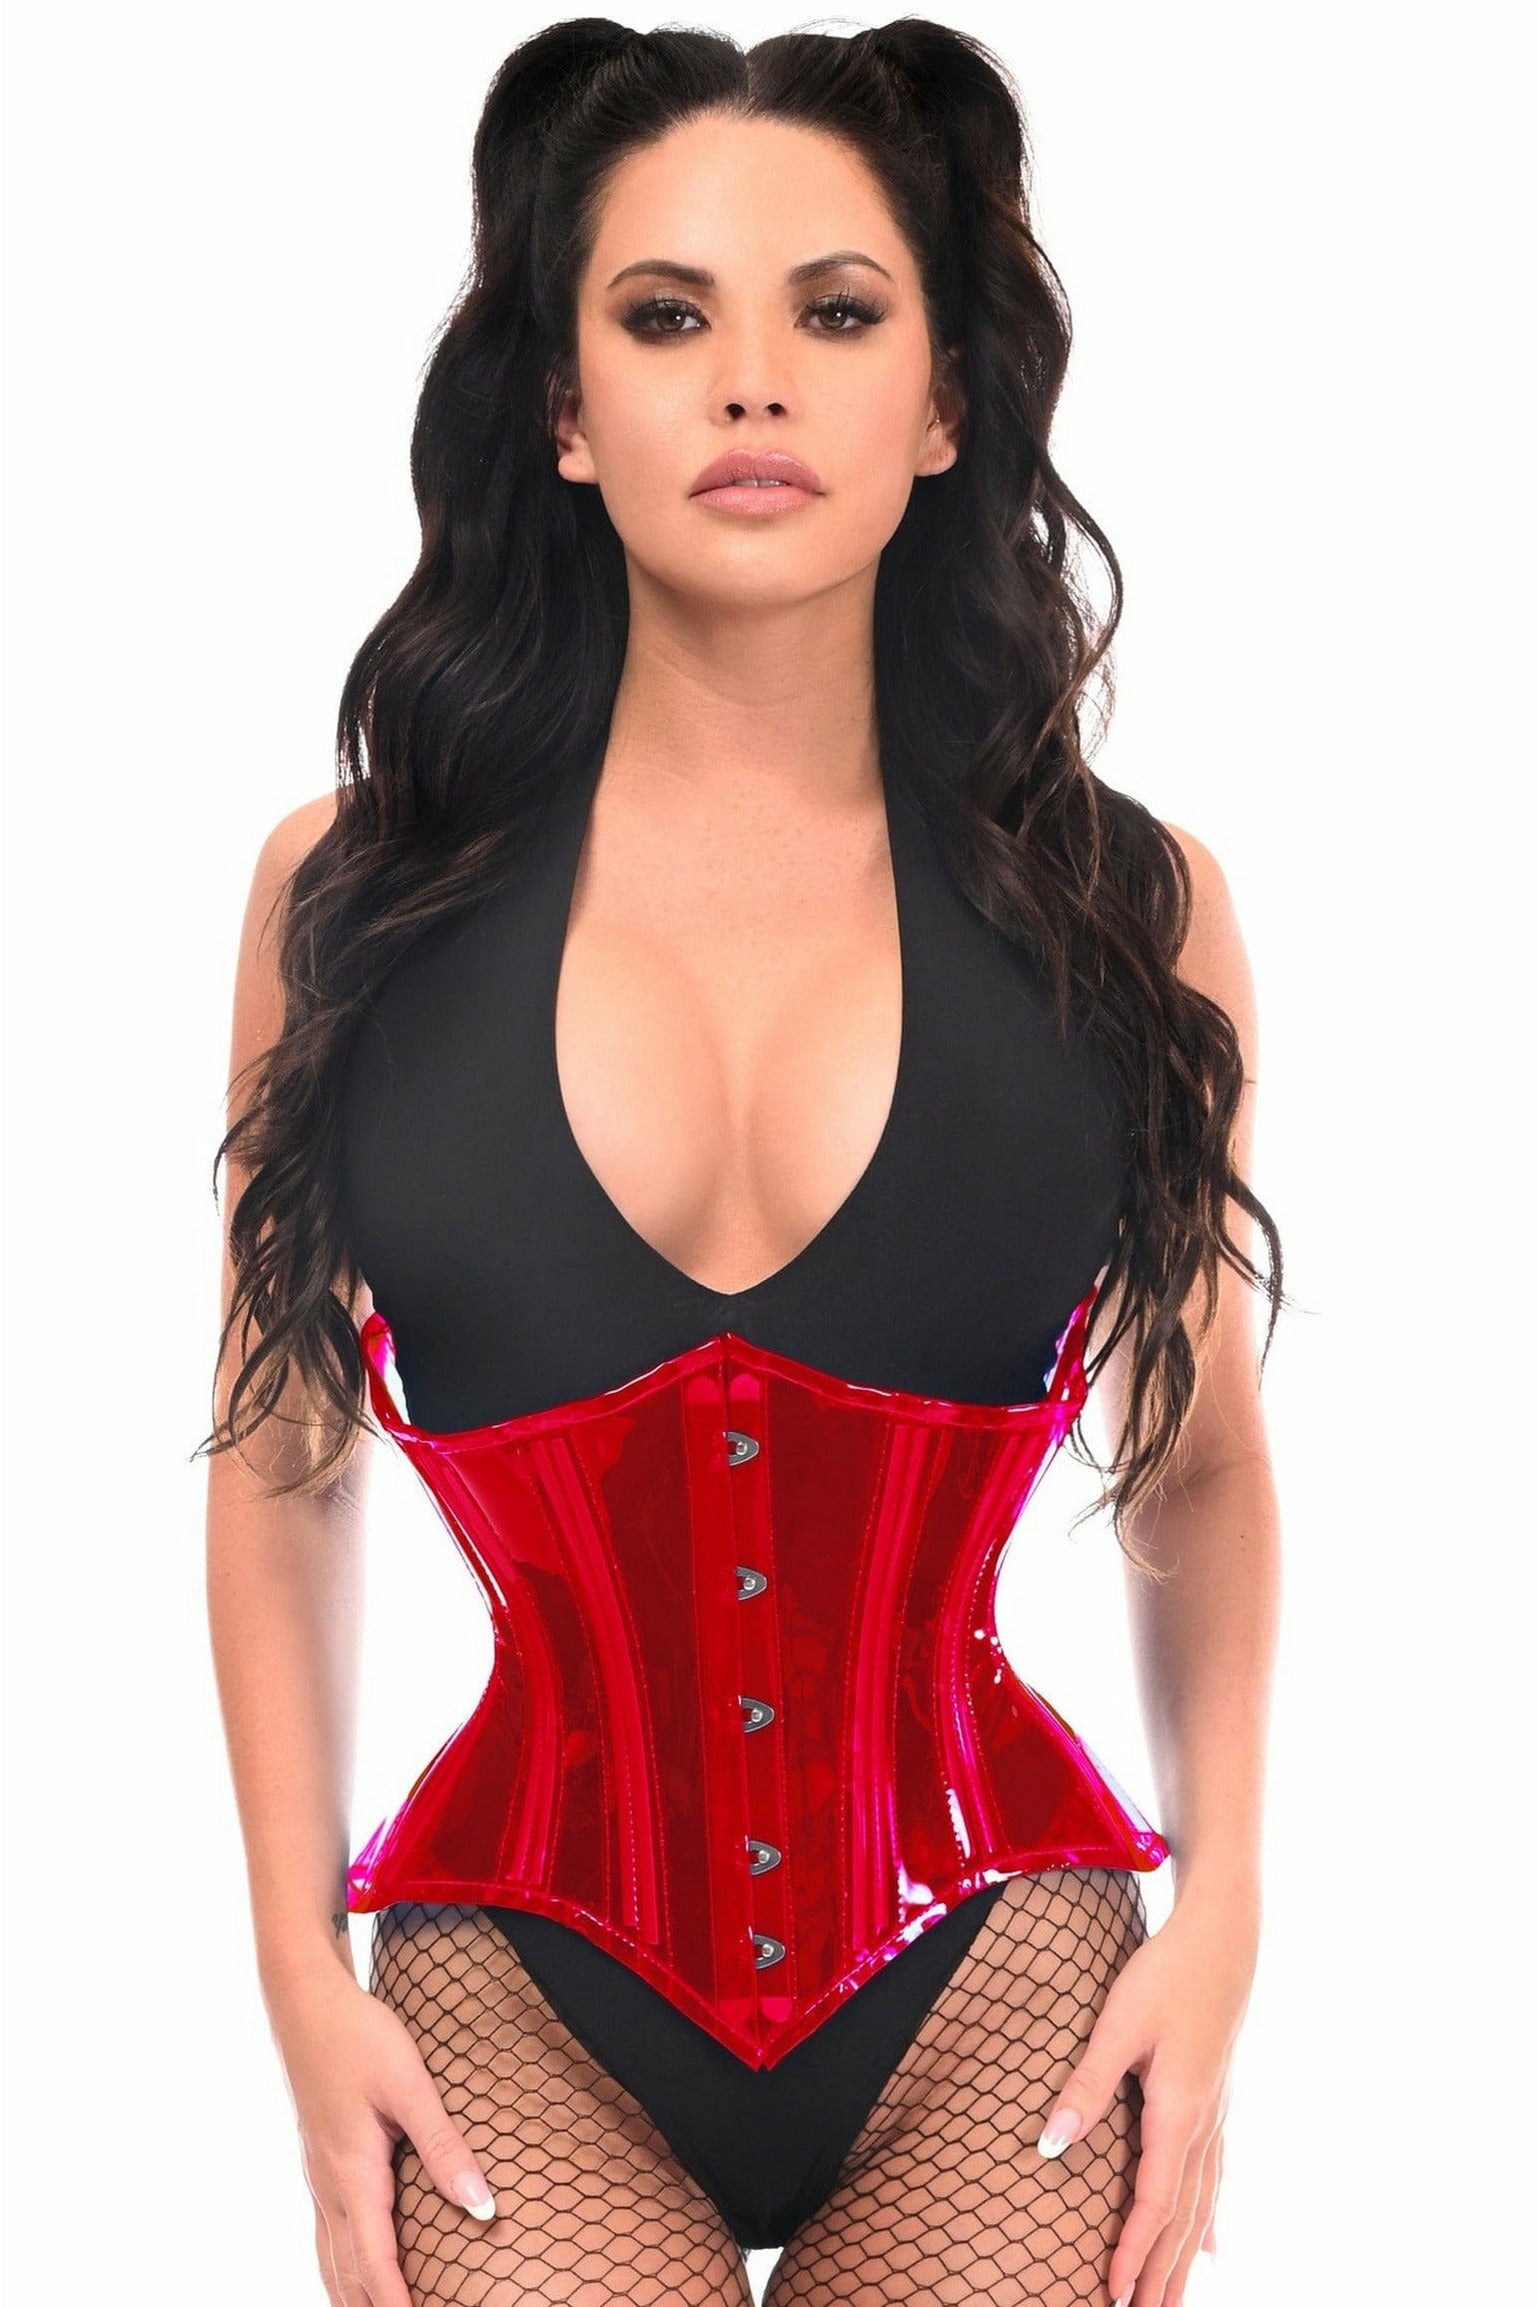 Daisy Corsets Lavish Red Lace Corset, Black And Red Corset 